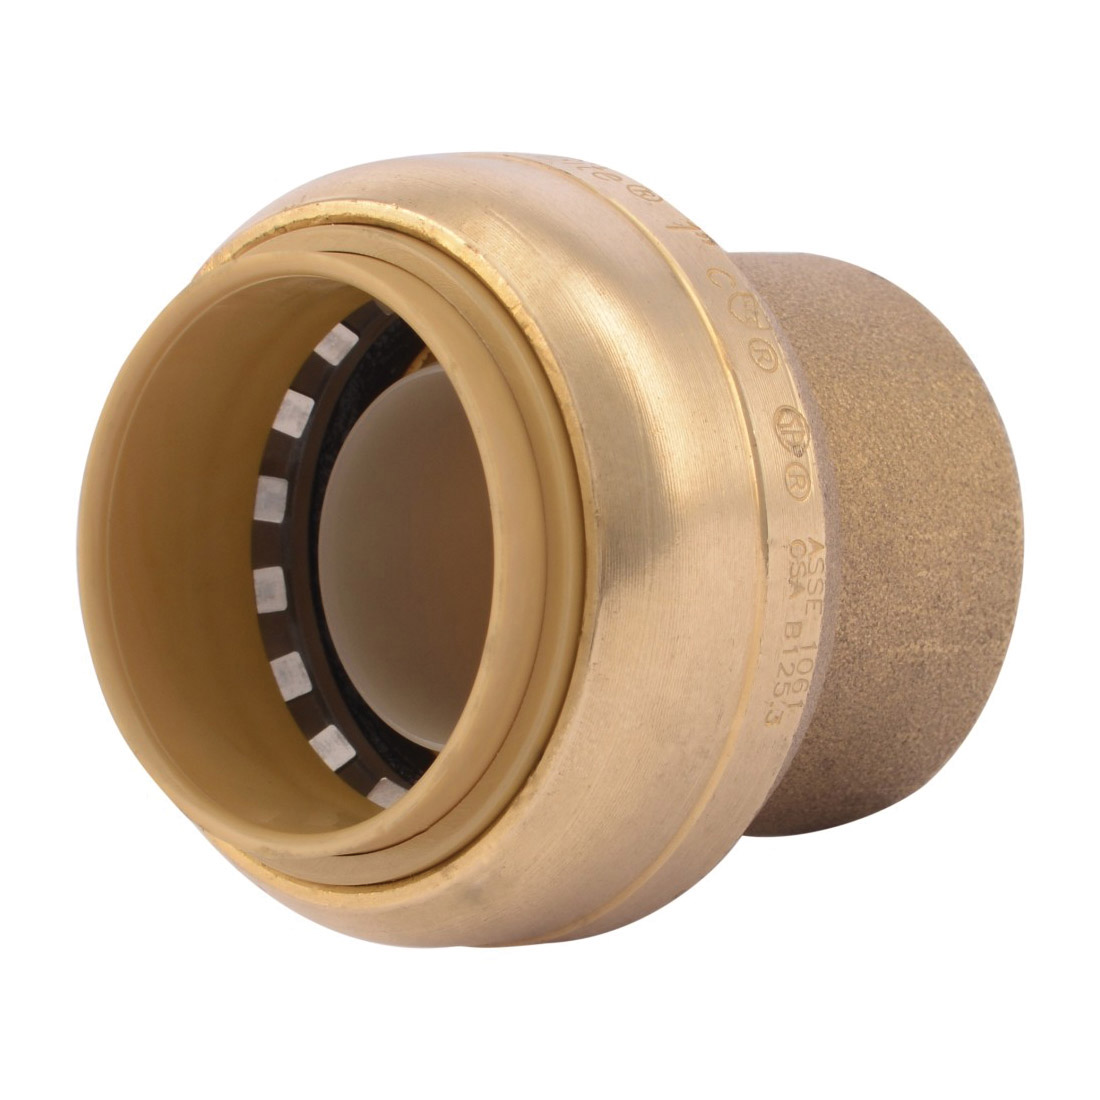 Sharkbite® U520LF Pipe End Cap, 1 in Nominal, Push-Fit End Style, Brass, Import